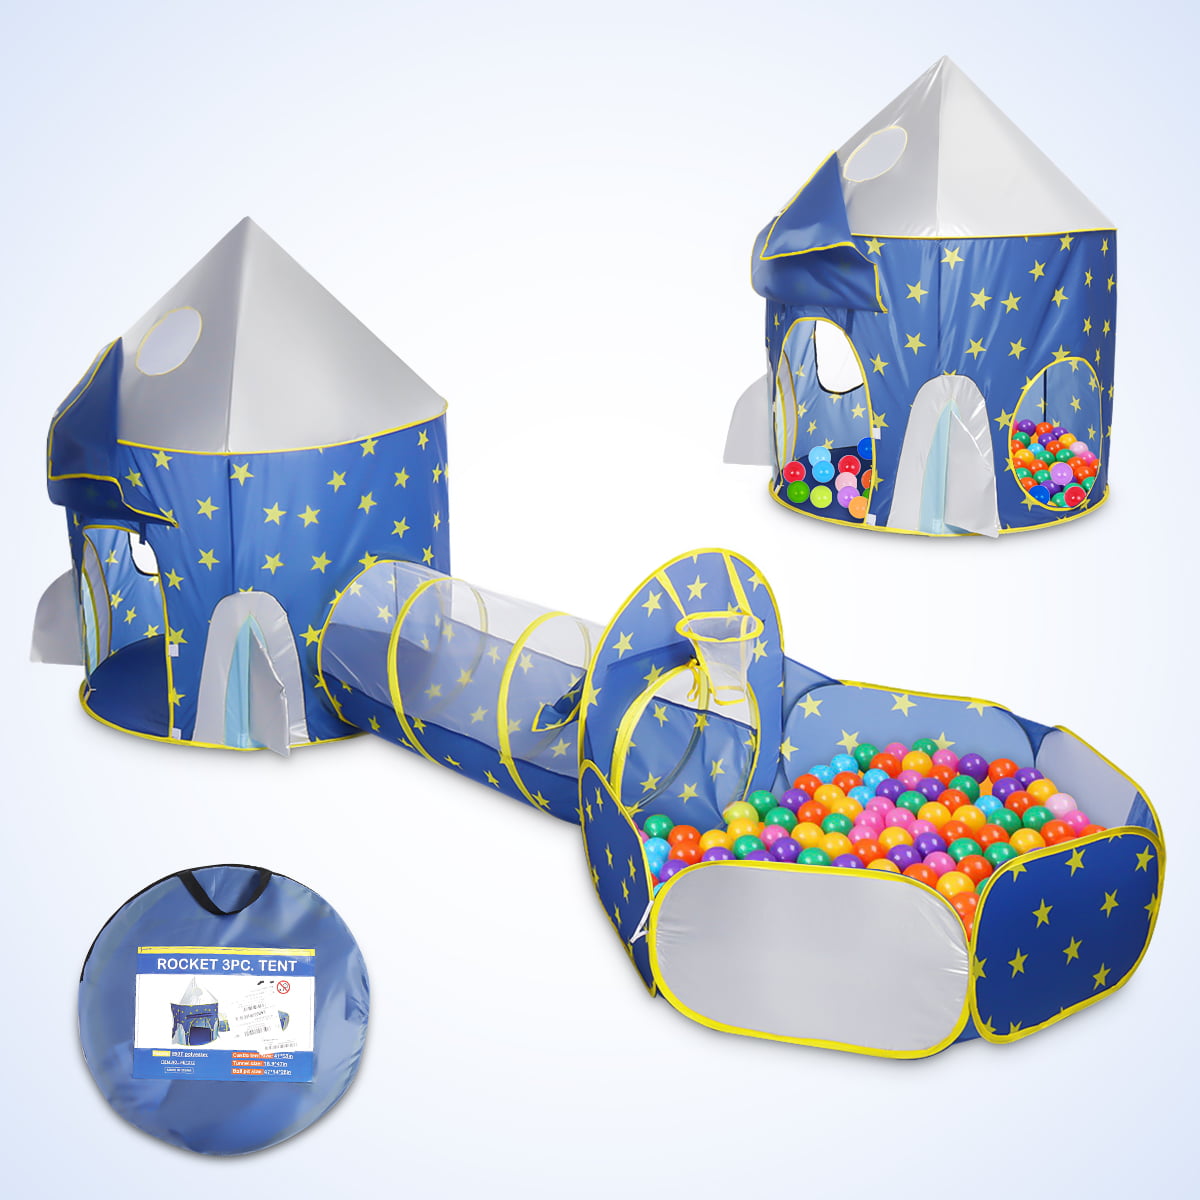 3-in-1 Space Ship Play Tent Kids Indoor Outdoor Boys Playhouse Ball Pit Tunnel 